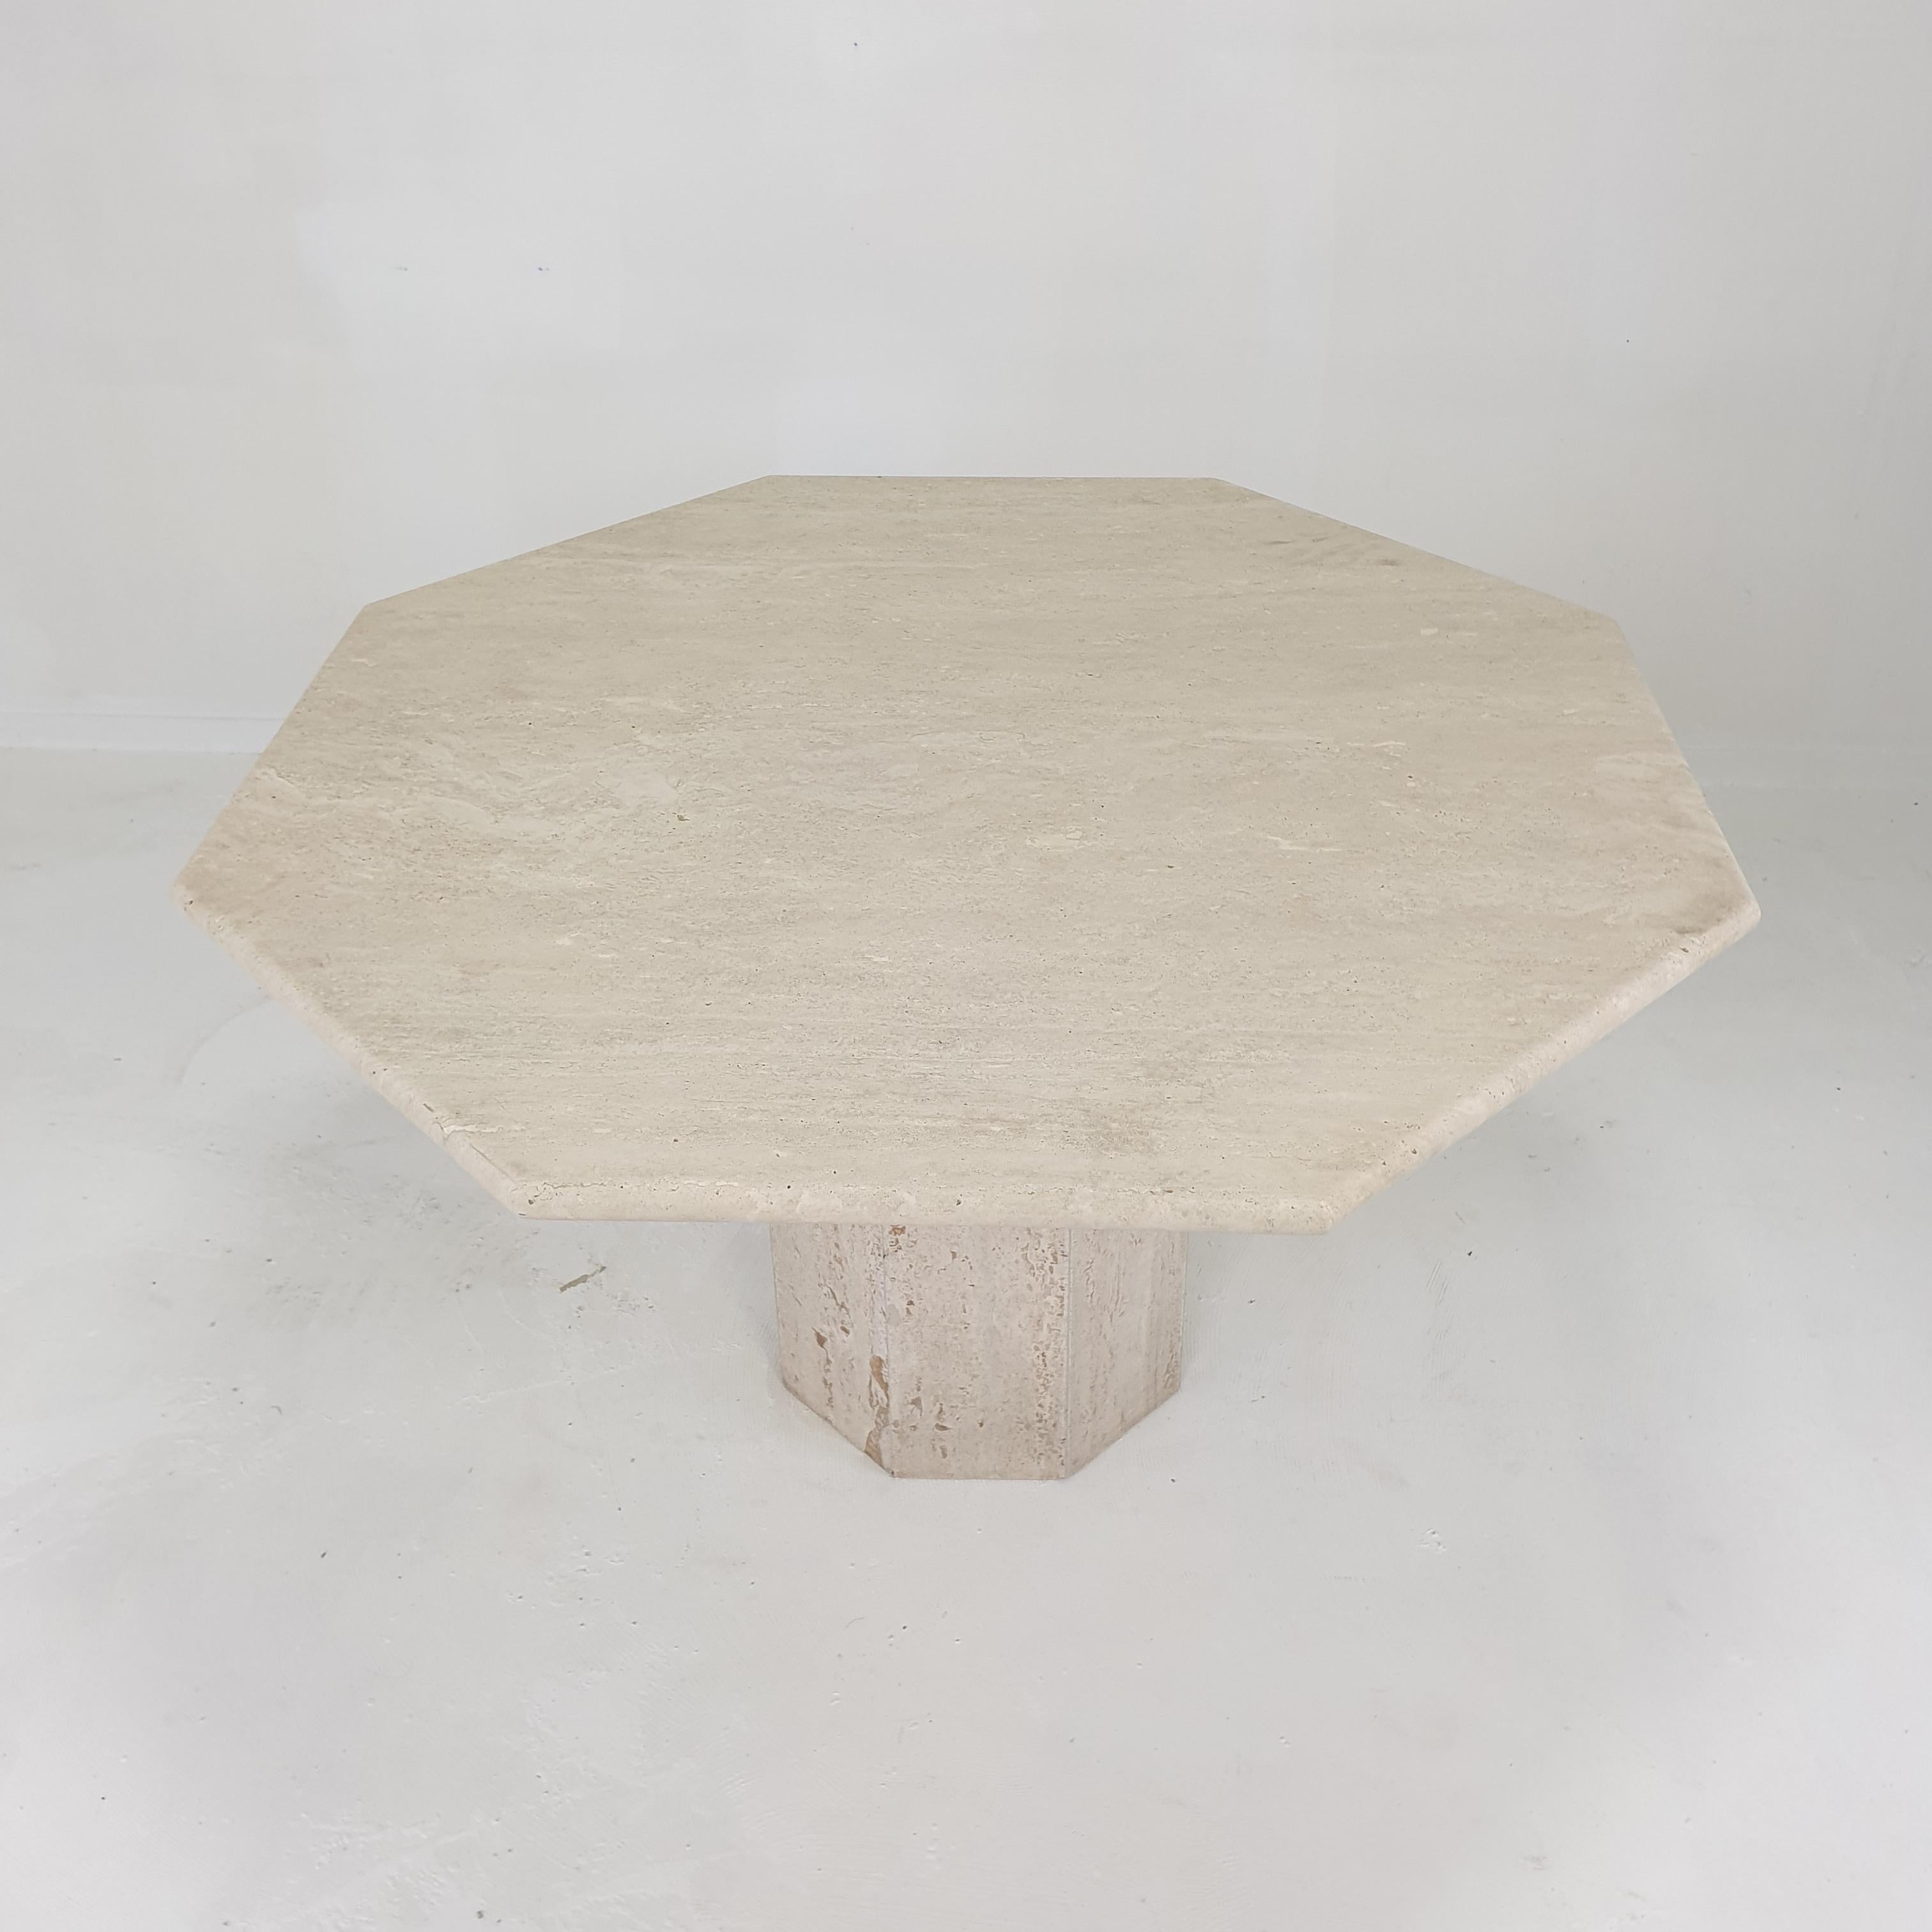 Hand-Crafted Italian Travertine Garden or Dining Table, 1970s For Sale